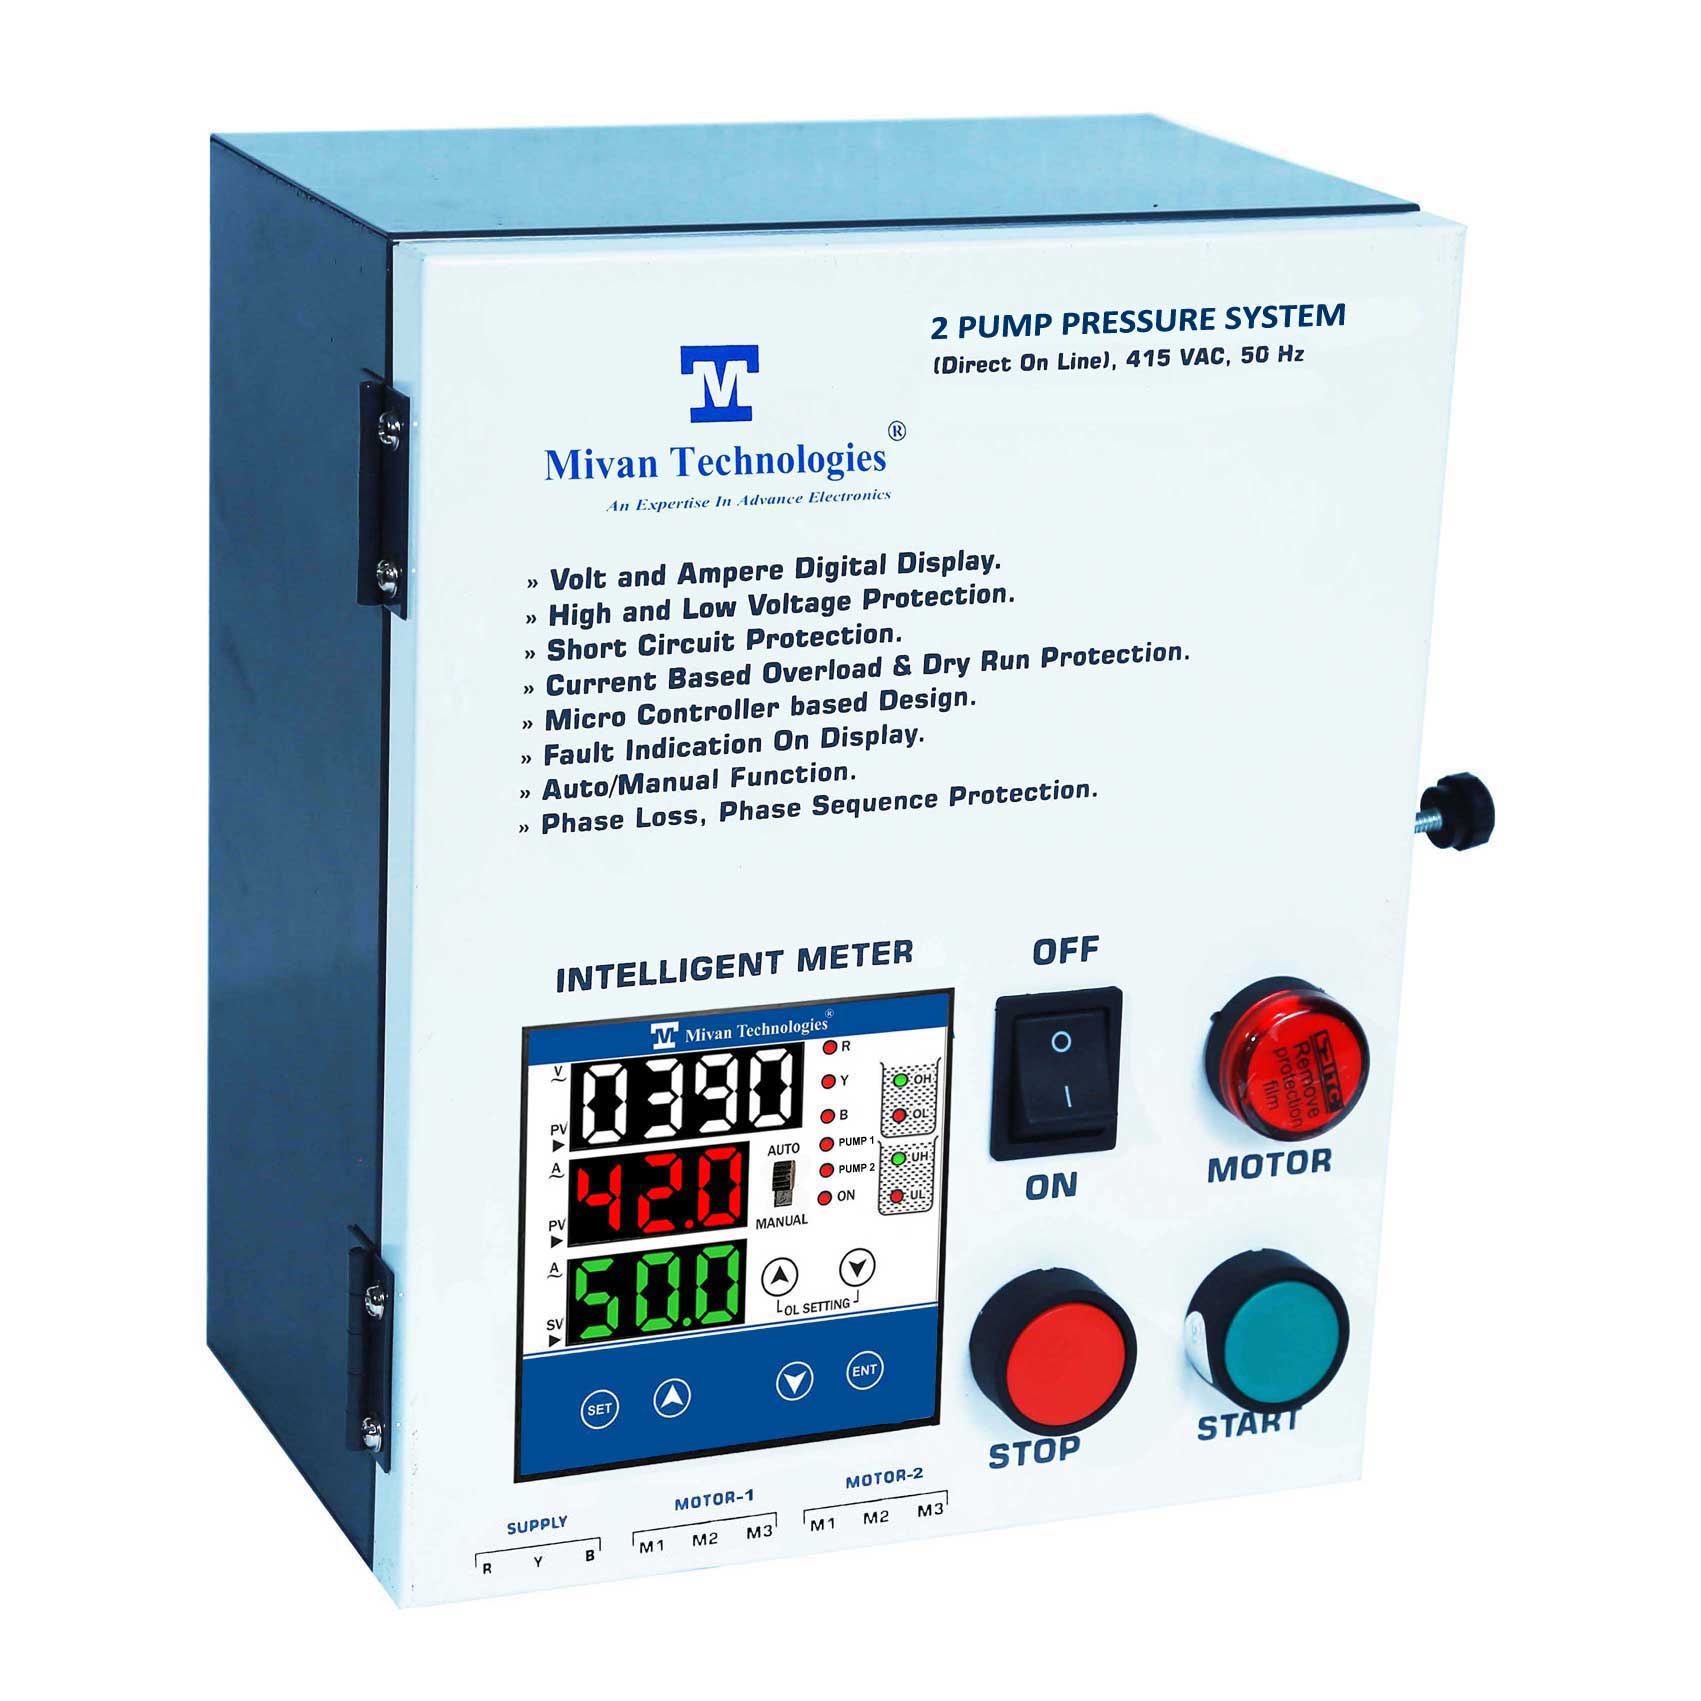 DOL DP 3 phase two pump pressure system with HV LV OL Dry protection with Auto switch spp and timer suitable up to 10 hp motor